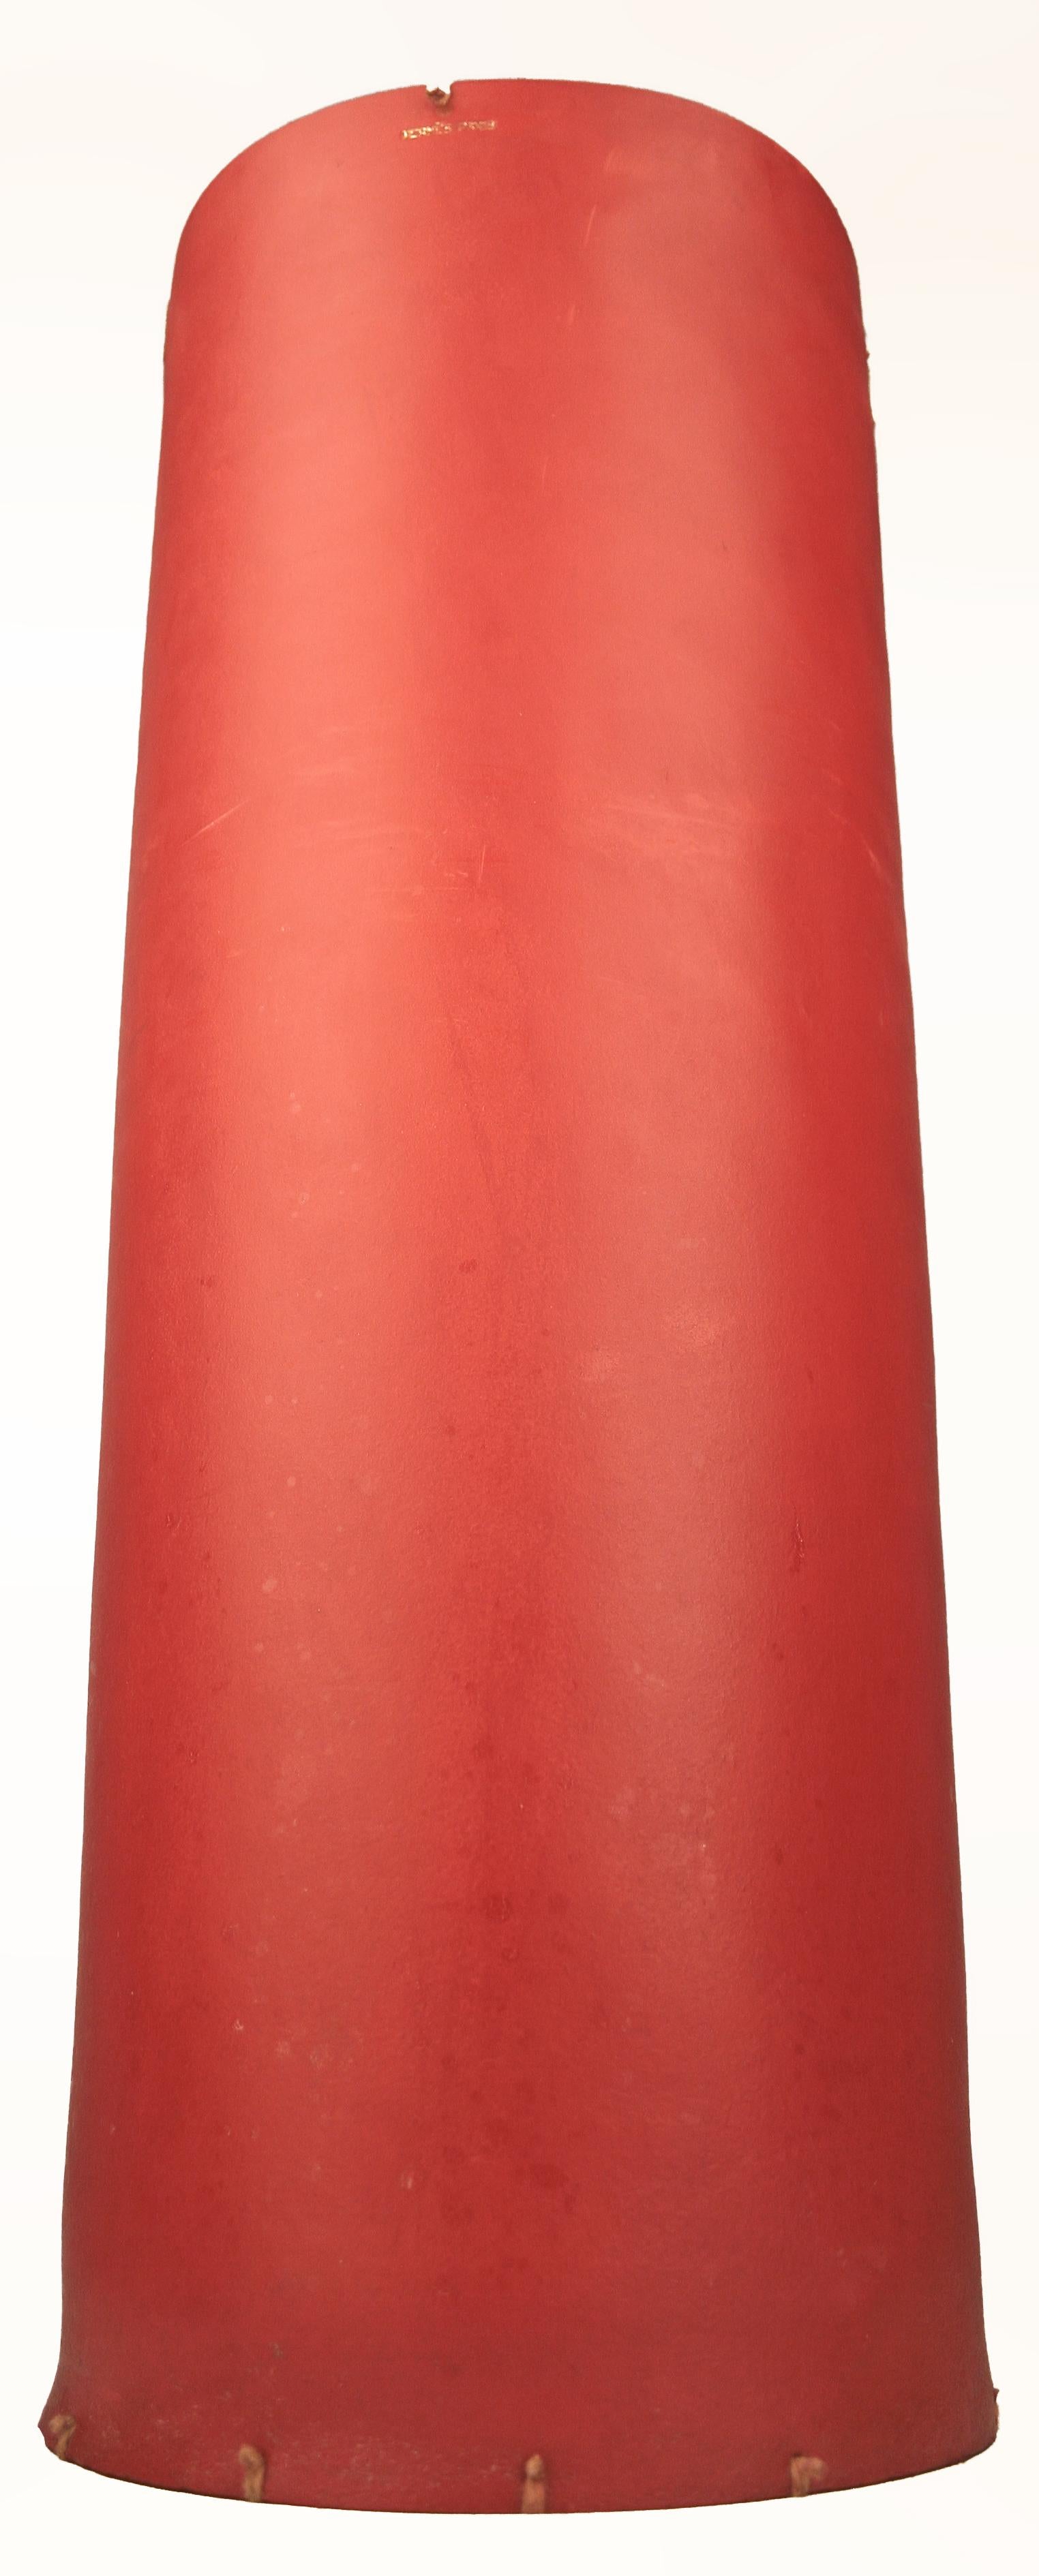 Mid-20th C. Modern French Red Leather Cylindrical Umbrella Stand by Hermès Paris For Sale 7